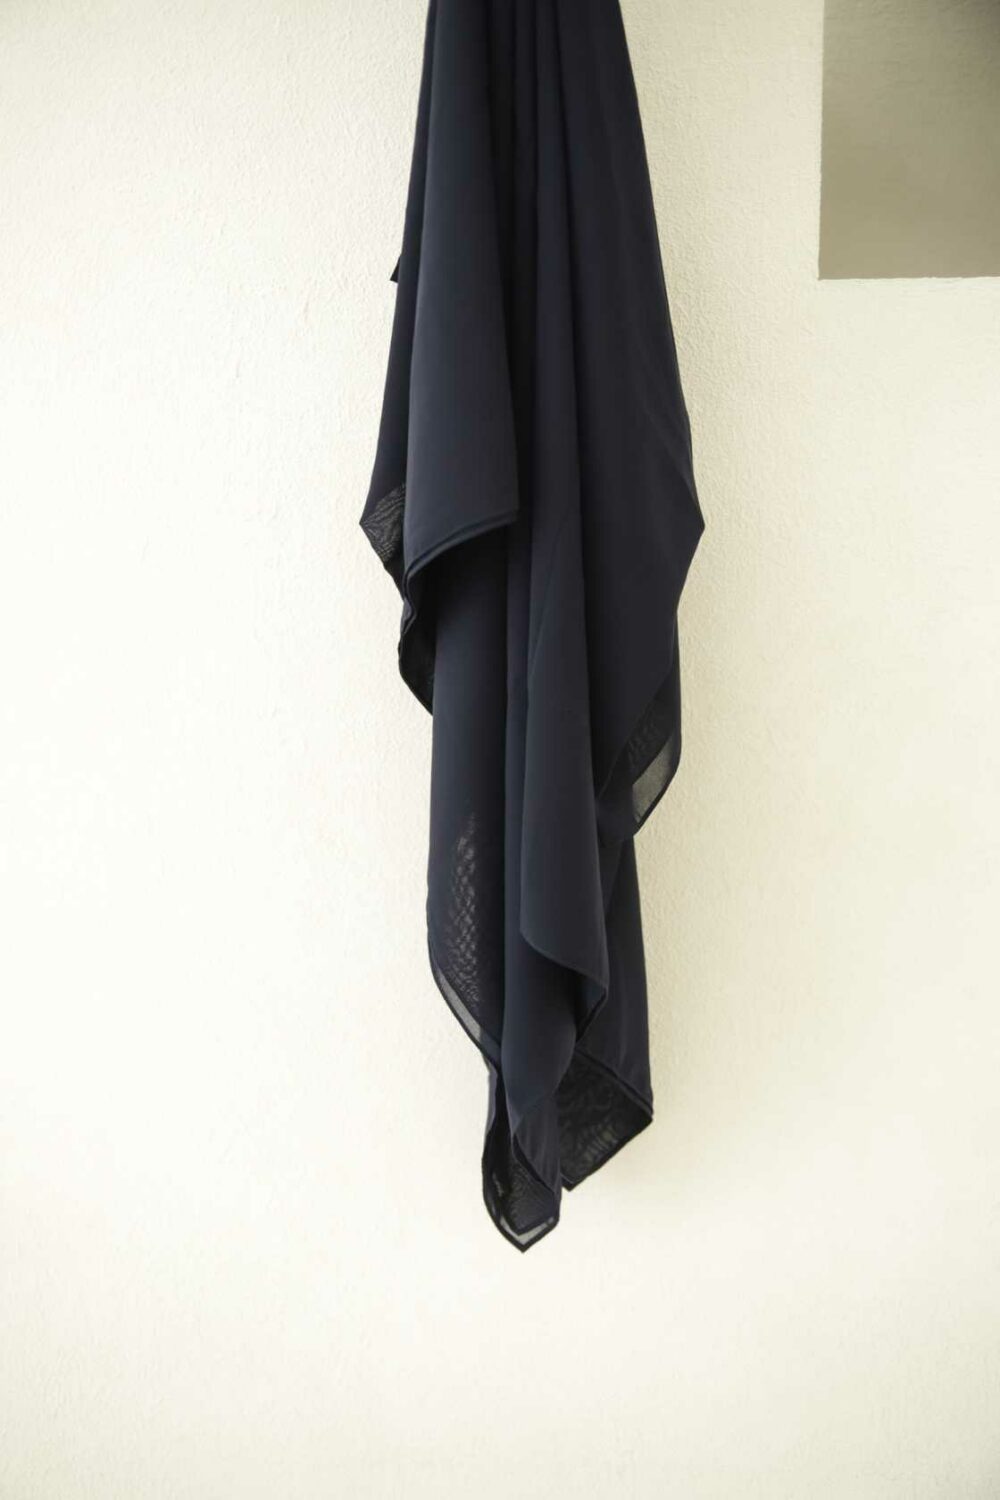 extra large hijab in navy